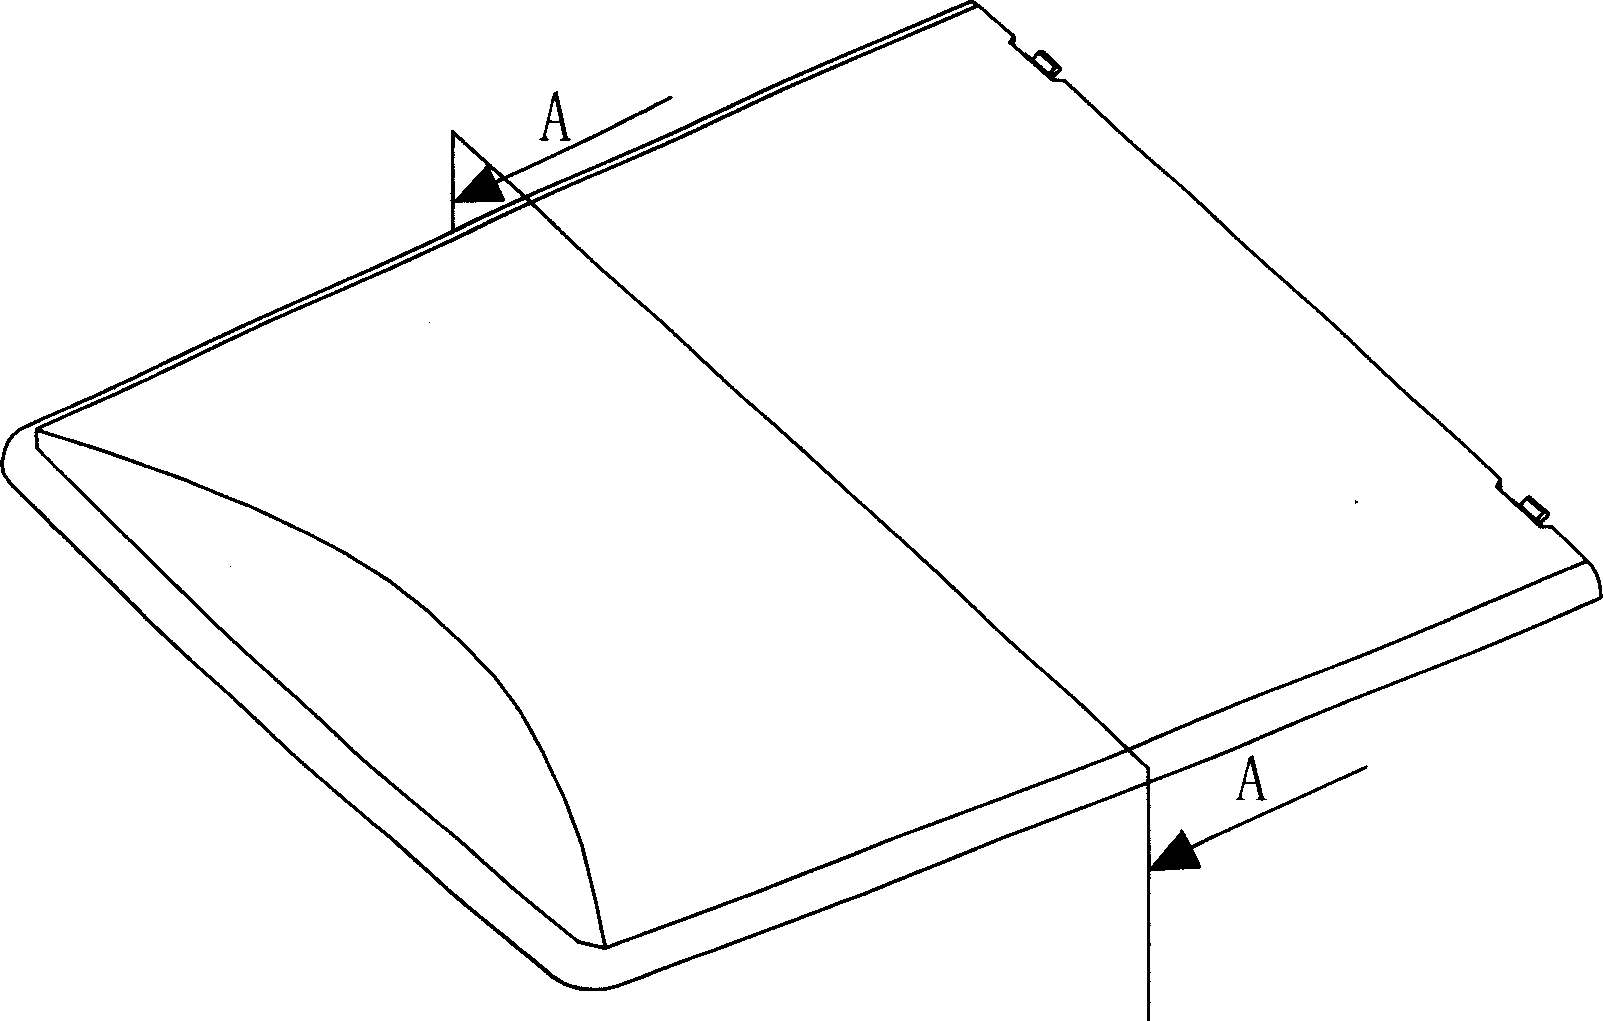 Enclosed pickup automobile tank and tank cover assembly